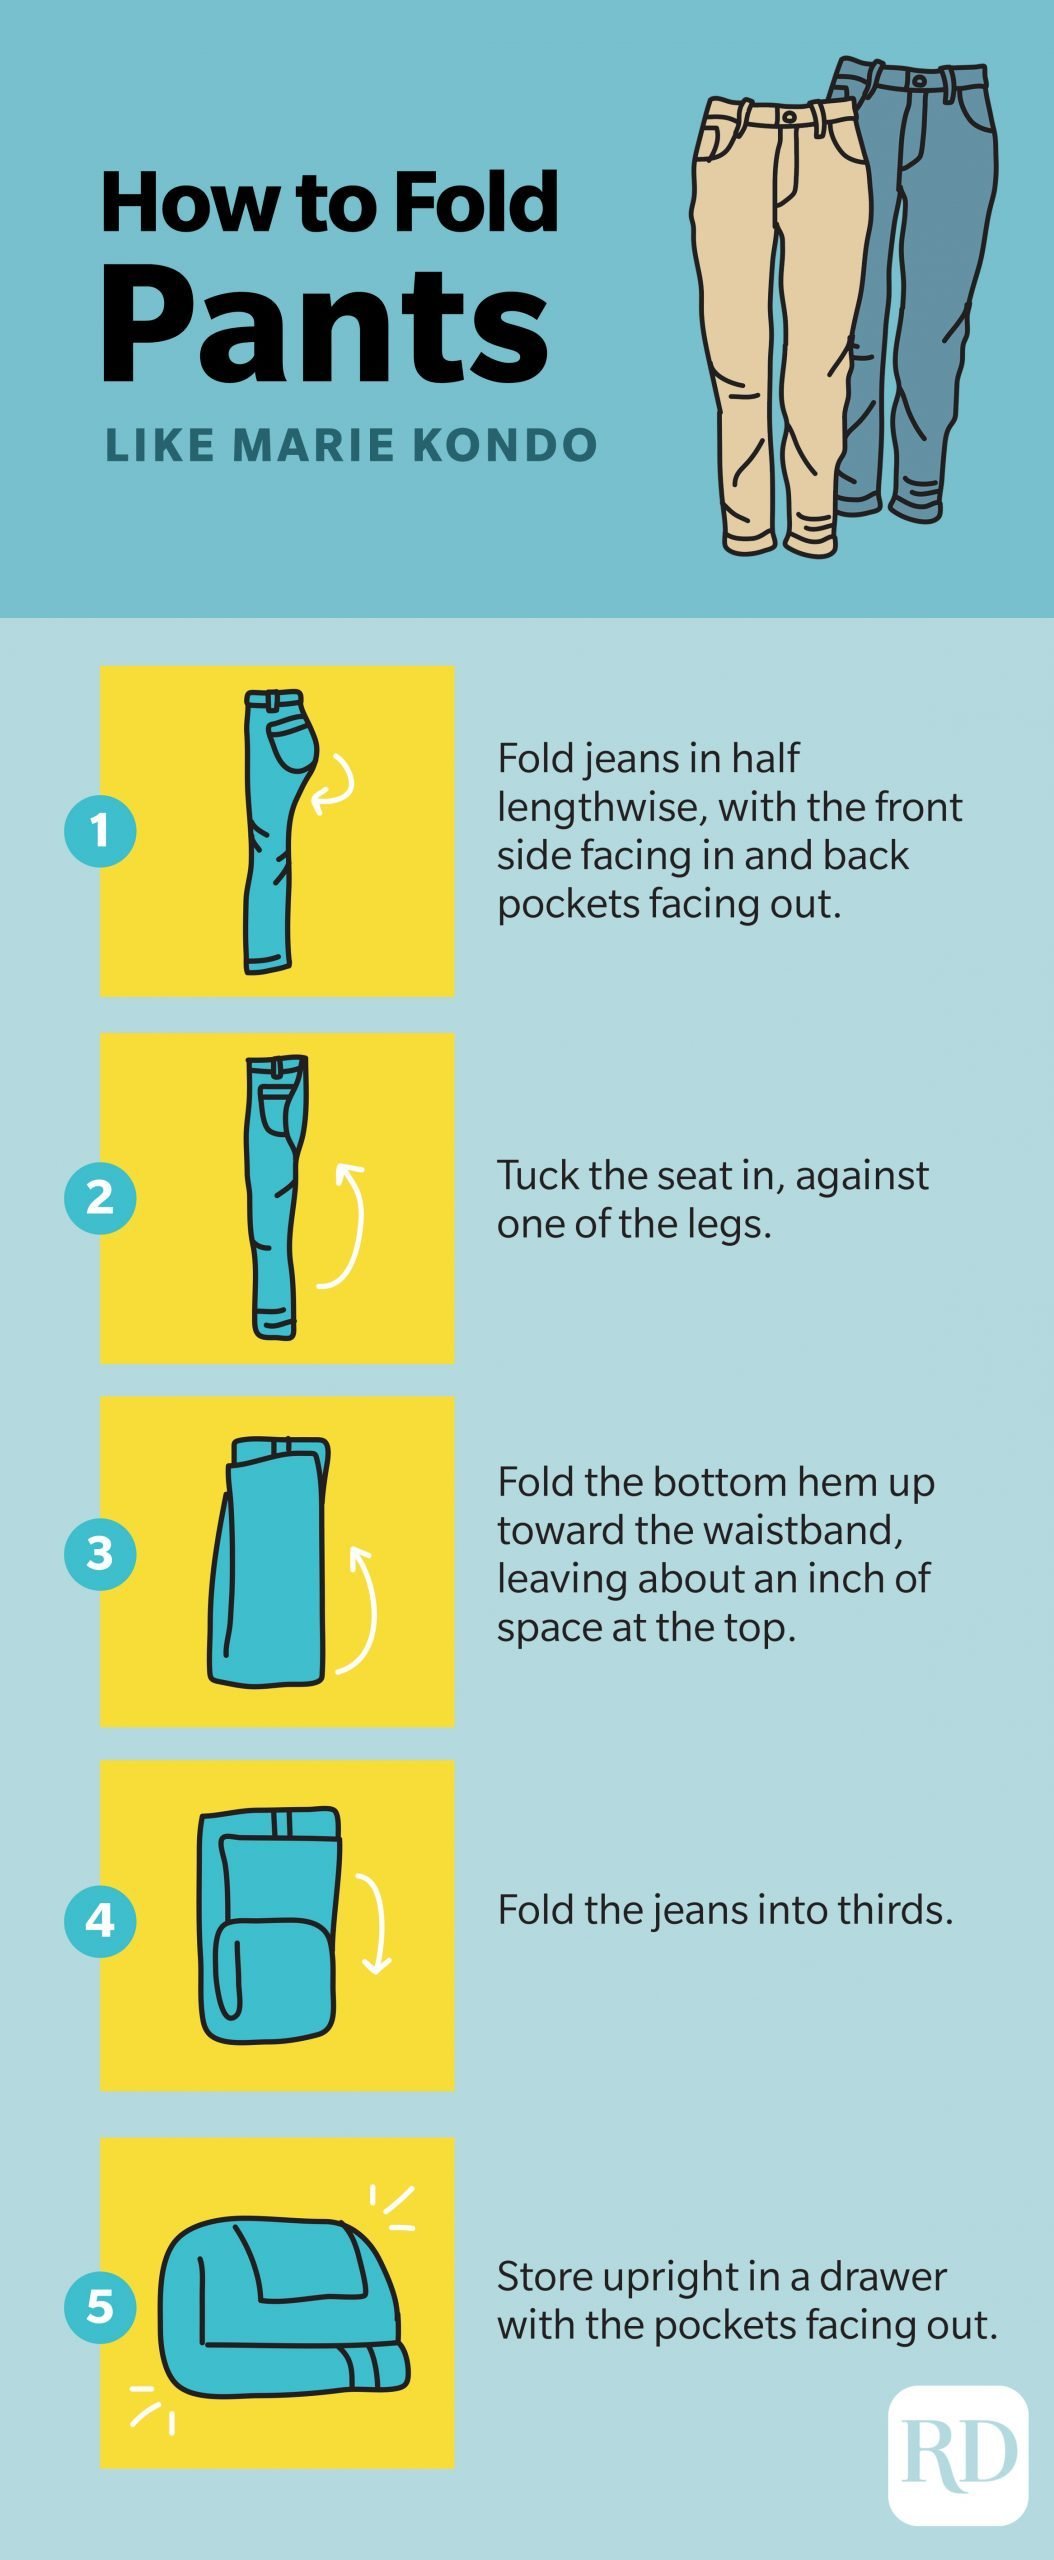 How to Fold Tank Tops : Folding Guidelines Step by Step